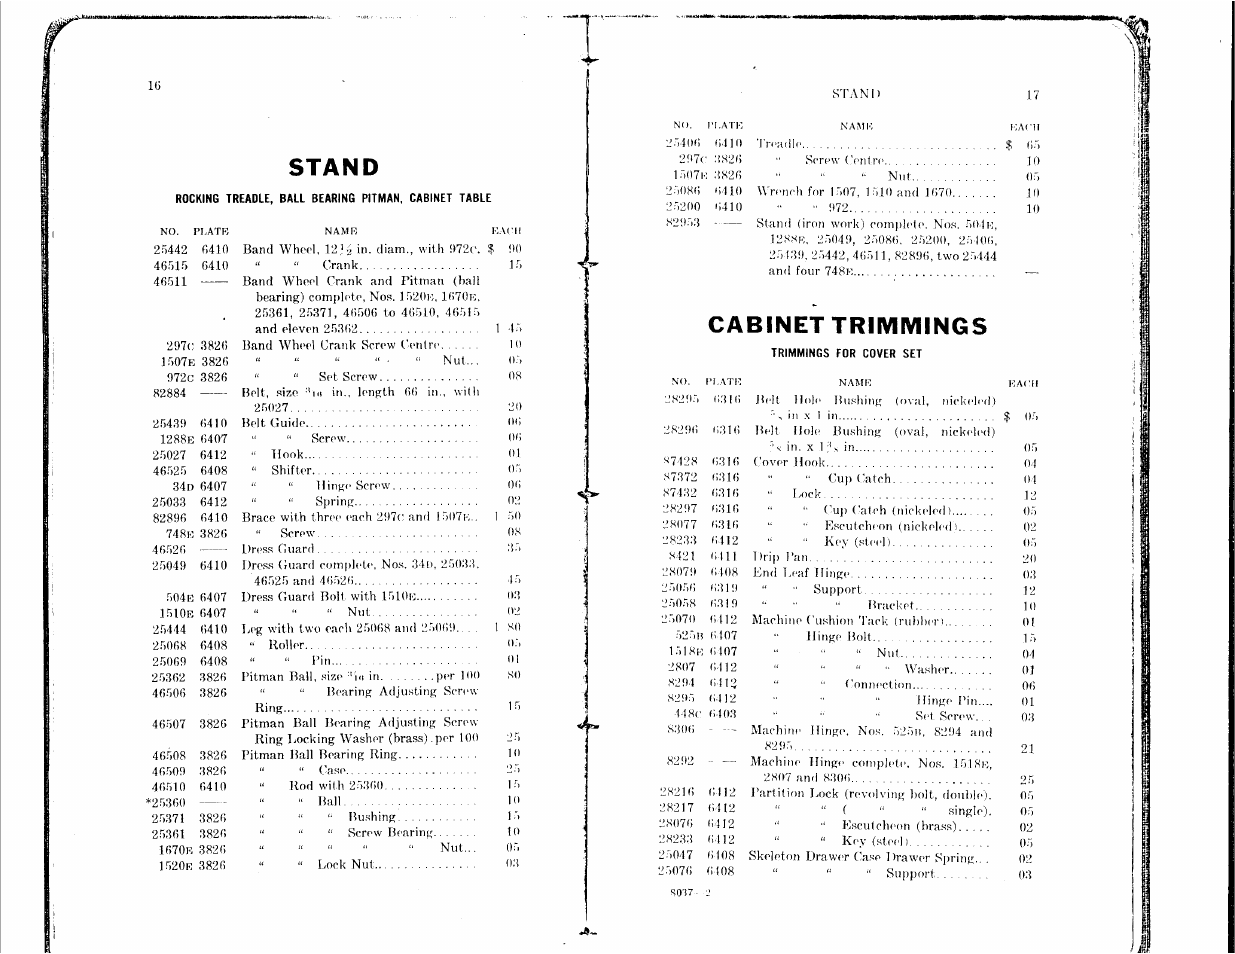 Stand, Cabinet trimmings | SINGER 128-4 User Manual | Page 8 / 25